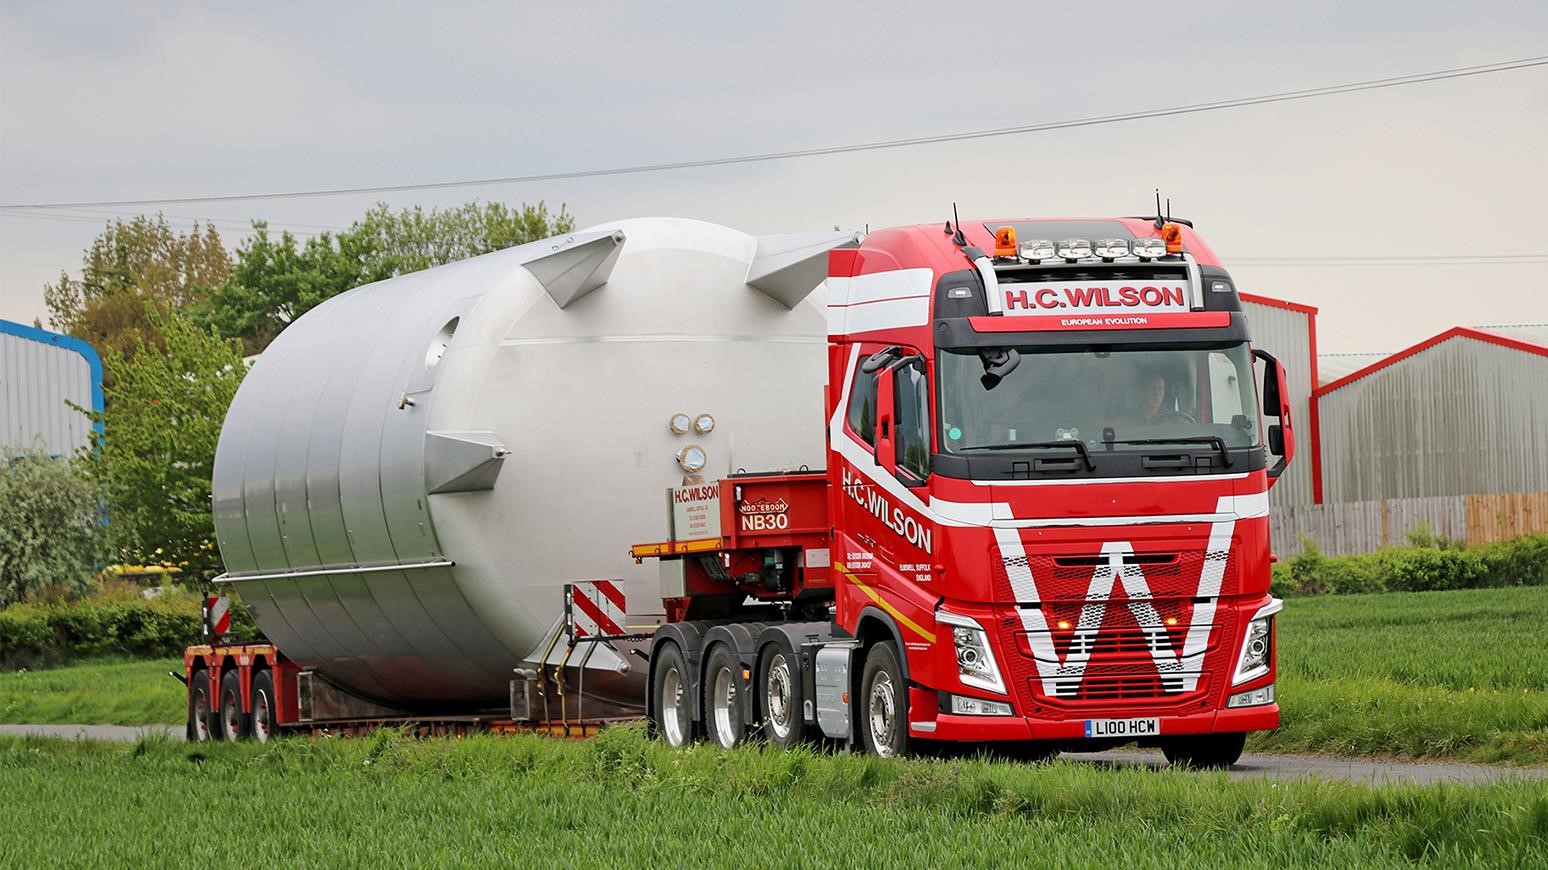 Suffolk-Based H.C. Wilson Transport Ltd. Adds New Four-Axle Volvo FH-540 To Adhere To German Axle Weight Regulations